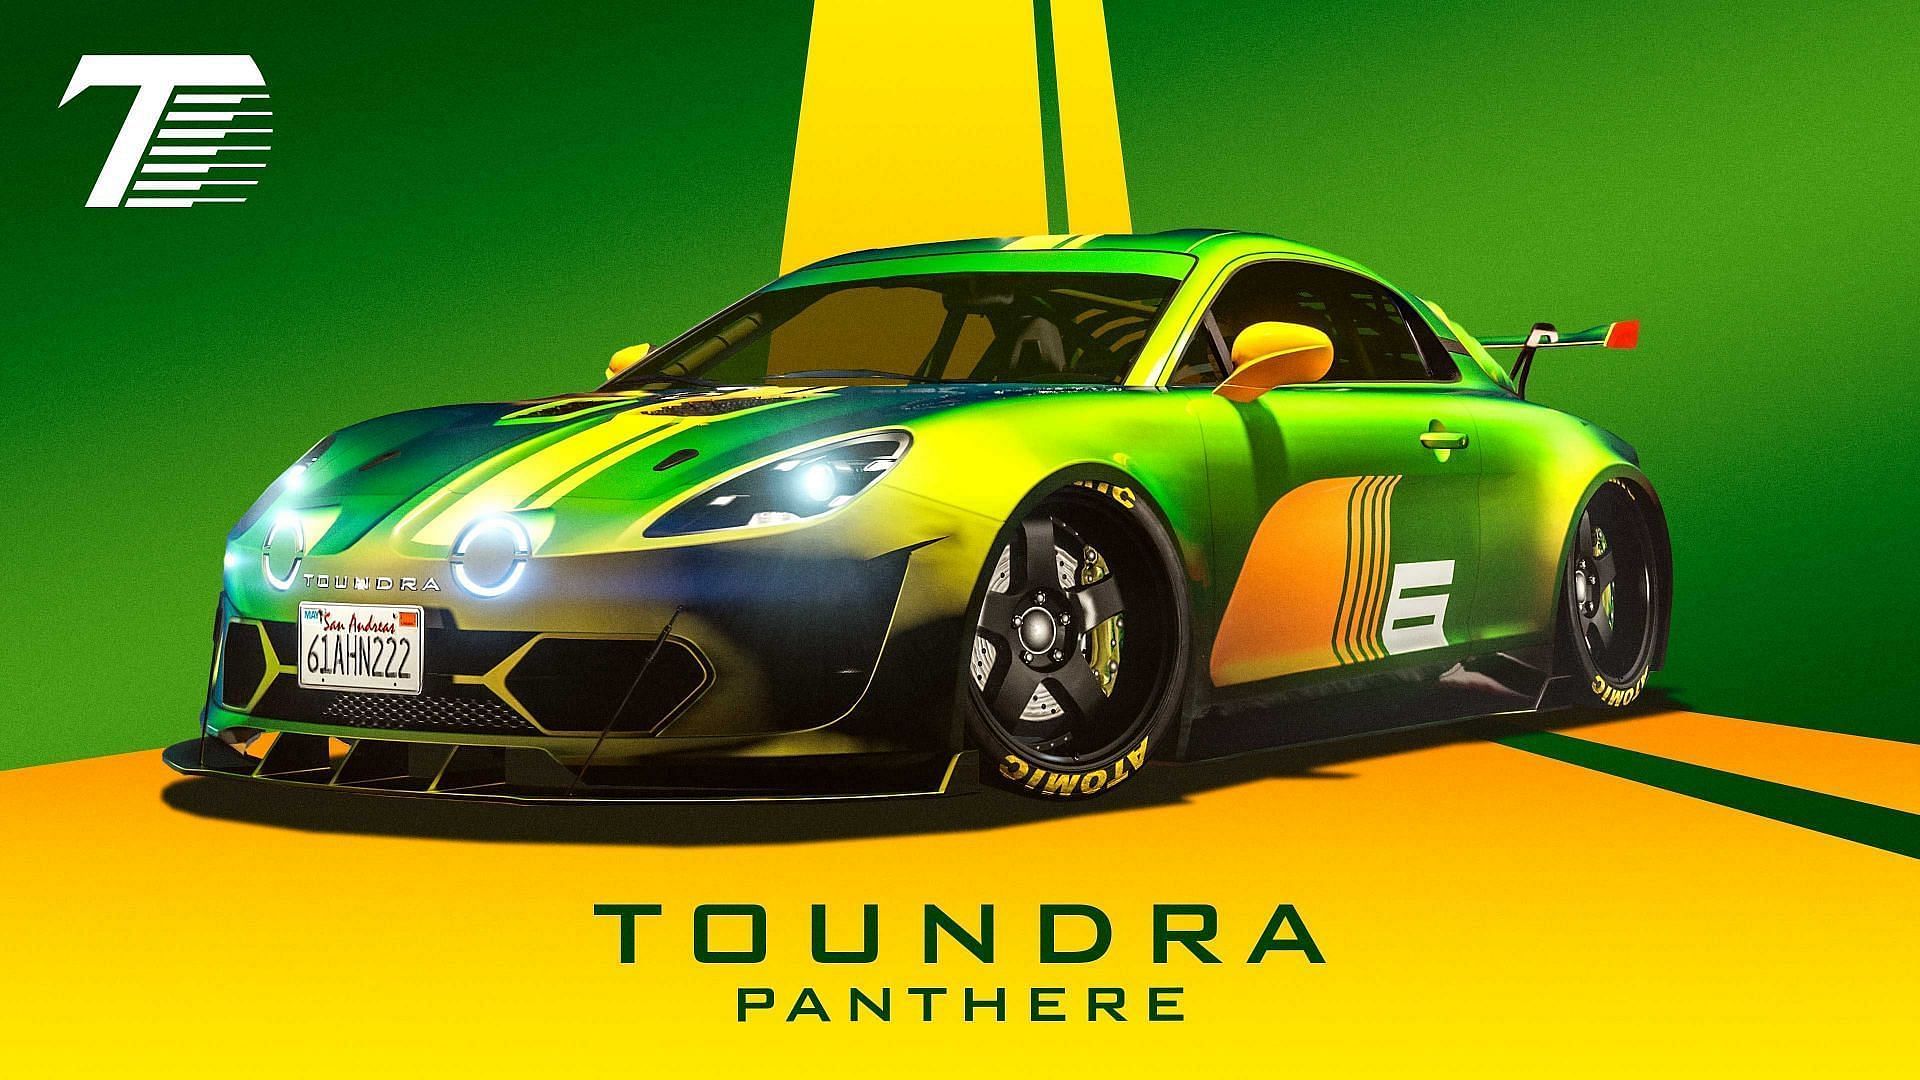 The Toundra Panthere is available once again in GTA Online (Image via Rockstar Games)